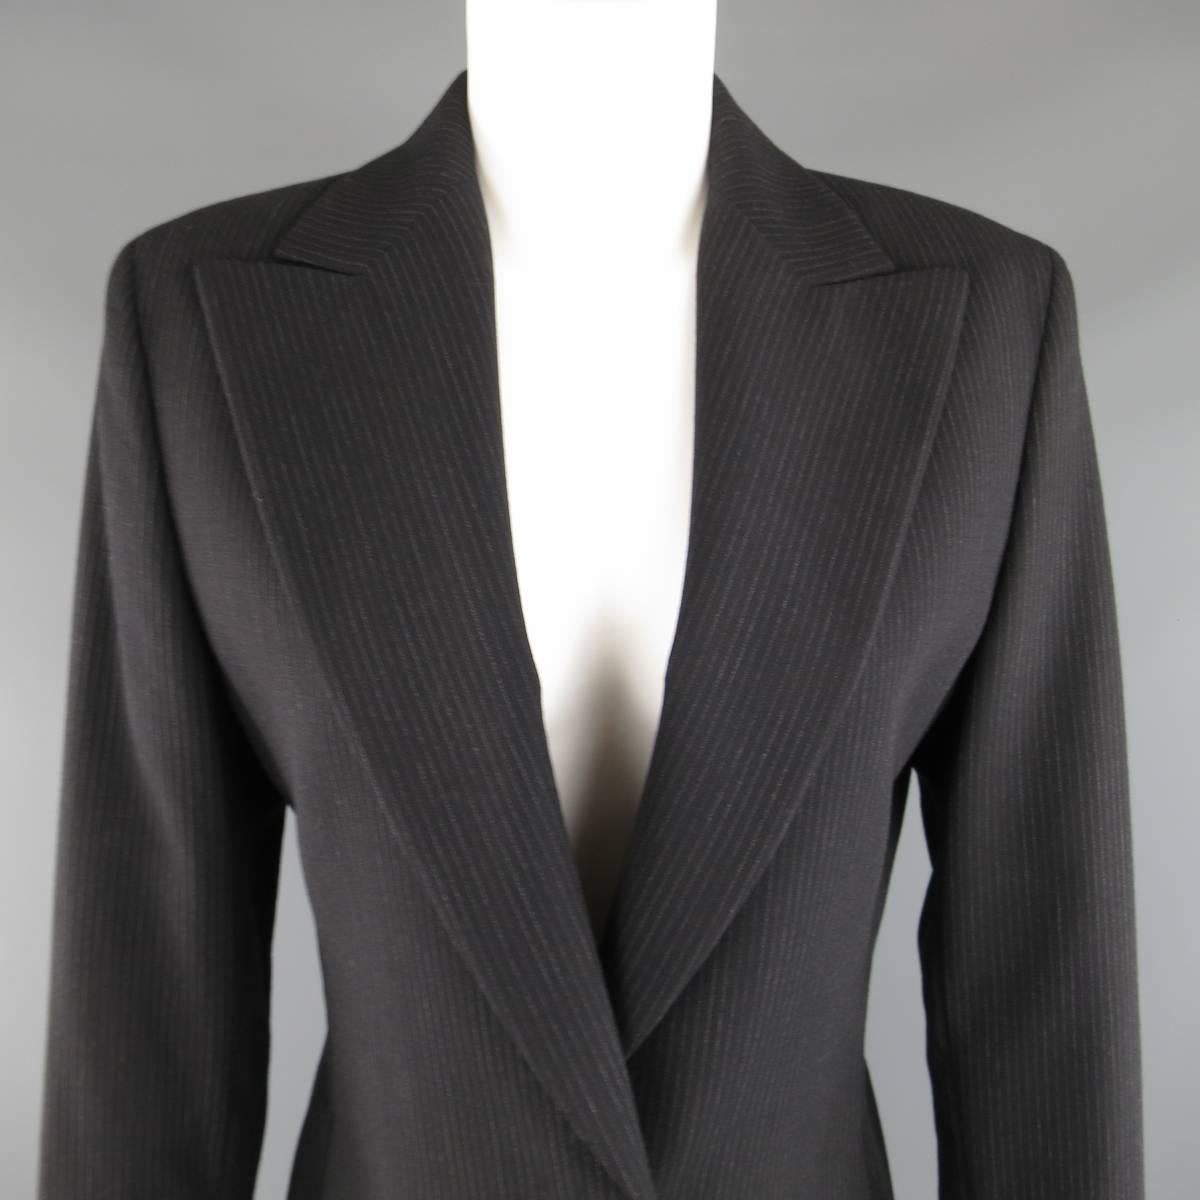 Vintage 1990's GIANNI VERSACE COUTURE blazer comes in a black pinstripe material and features a wide peak lapel,, cropped silhouette, and single button closure with black Greek pattern embossed V buttons. Minor wear on buttons. Made in Italy.
 
Good